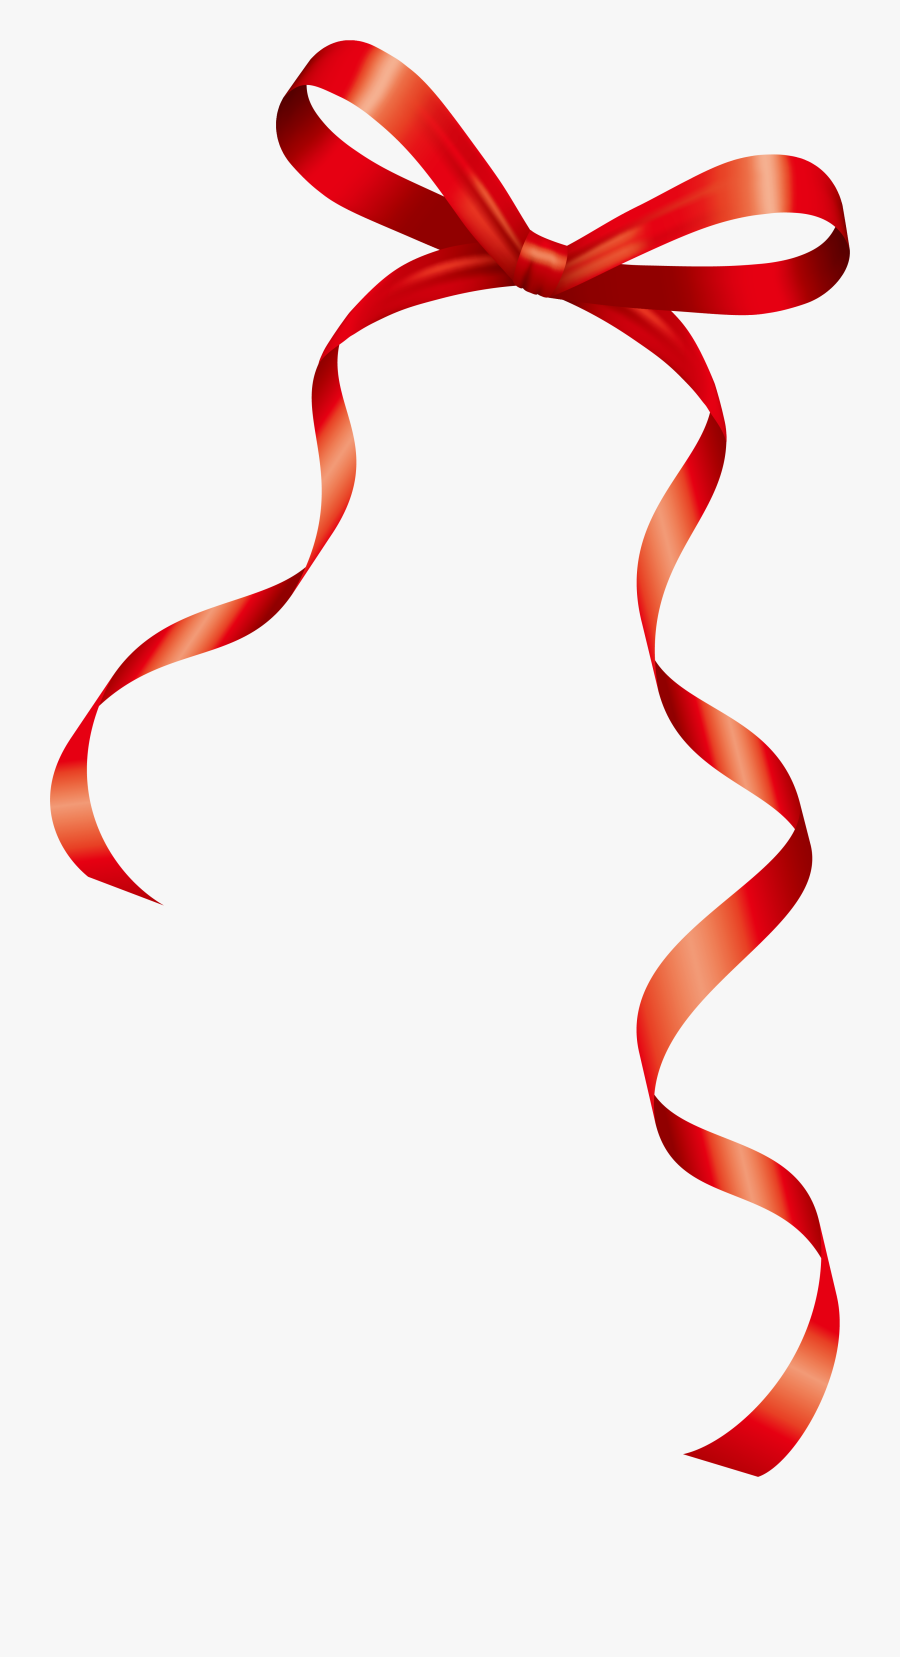 Transparent Hand Drawn Red Arrow Png - Painted Ribbon, Transparent Clipart